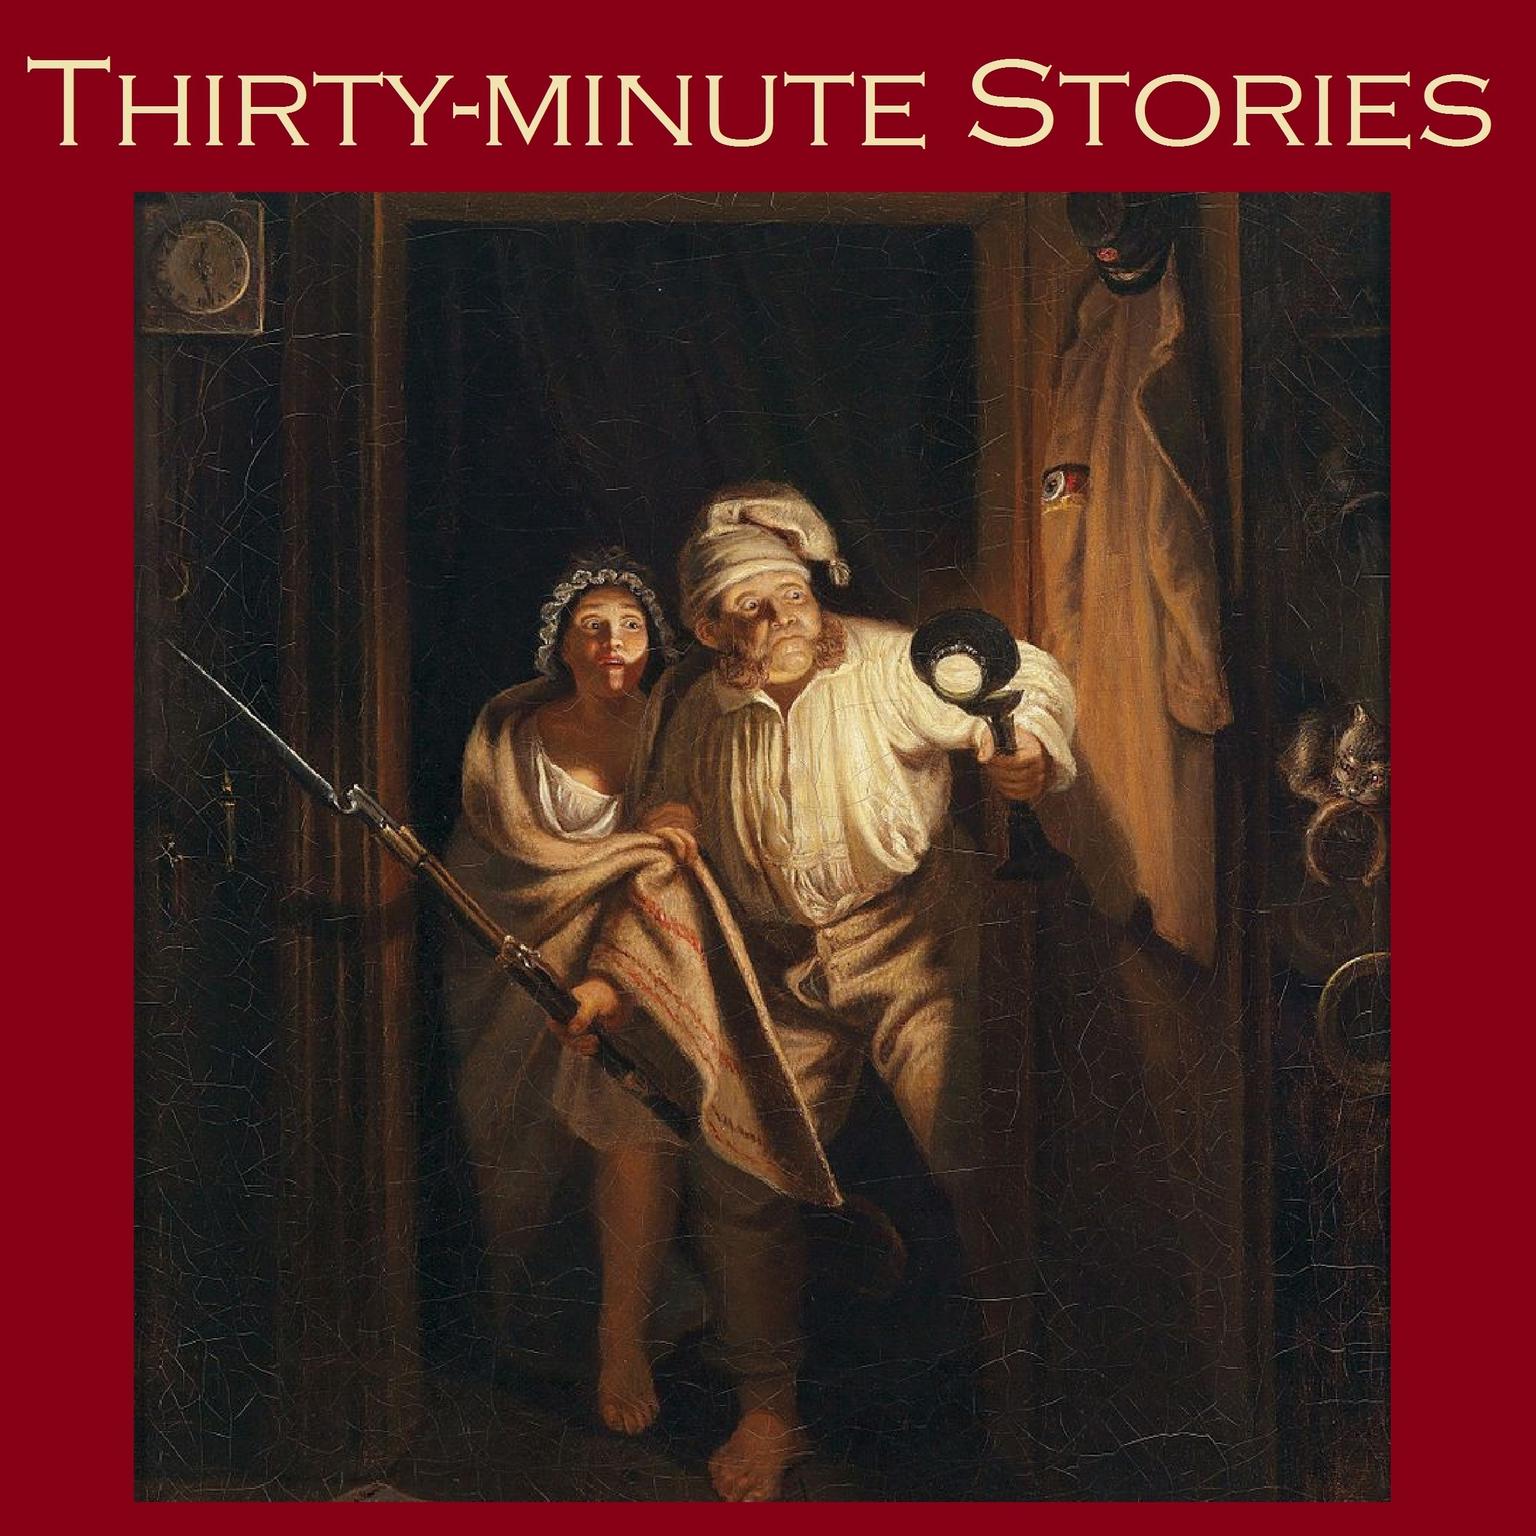 Thirty-Minute Stories: A Bumper Anthology of Great Classic Short Stories Audiobook, by various authors